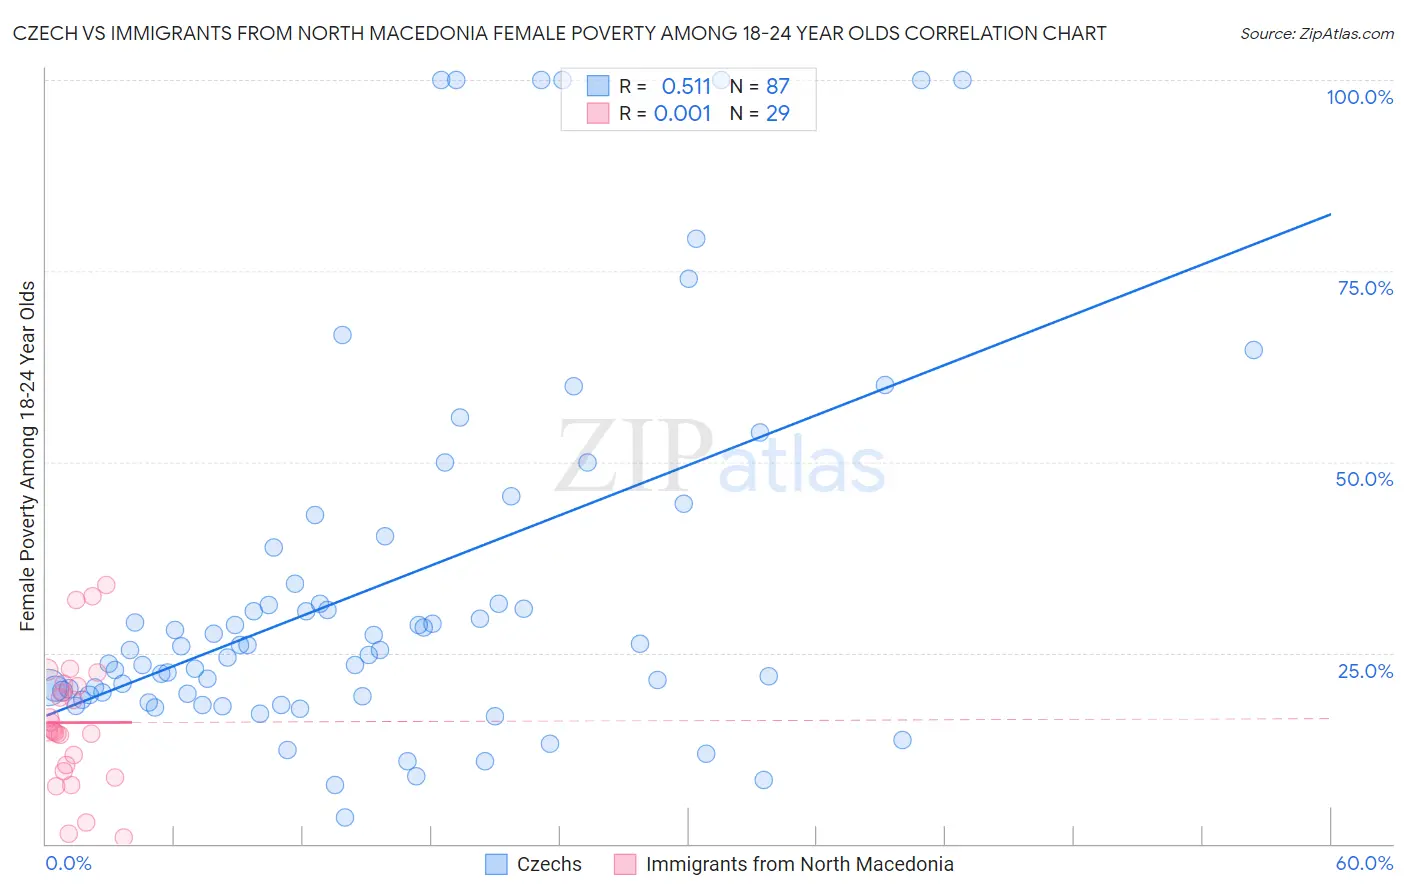 Czech vs Immigrants from North Macedonia Female Poverty Among 18-24 Year Olds